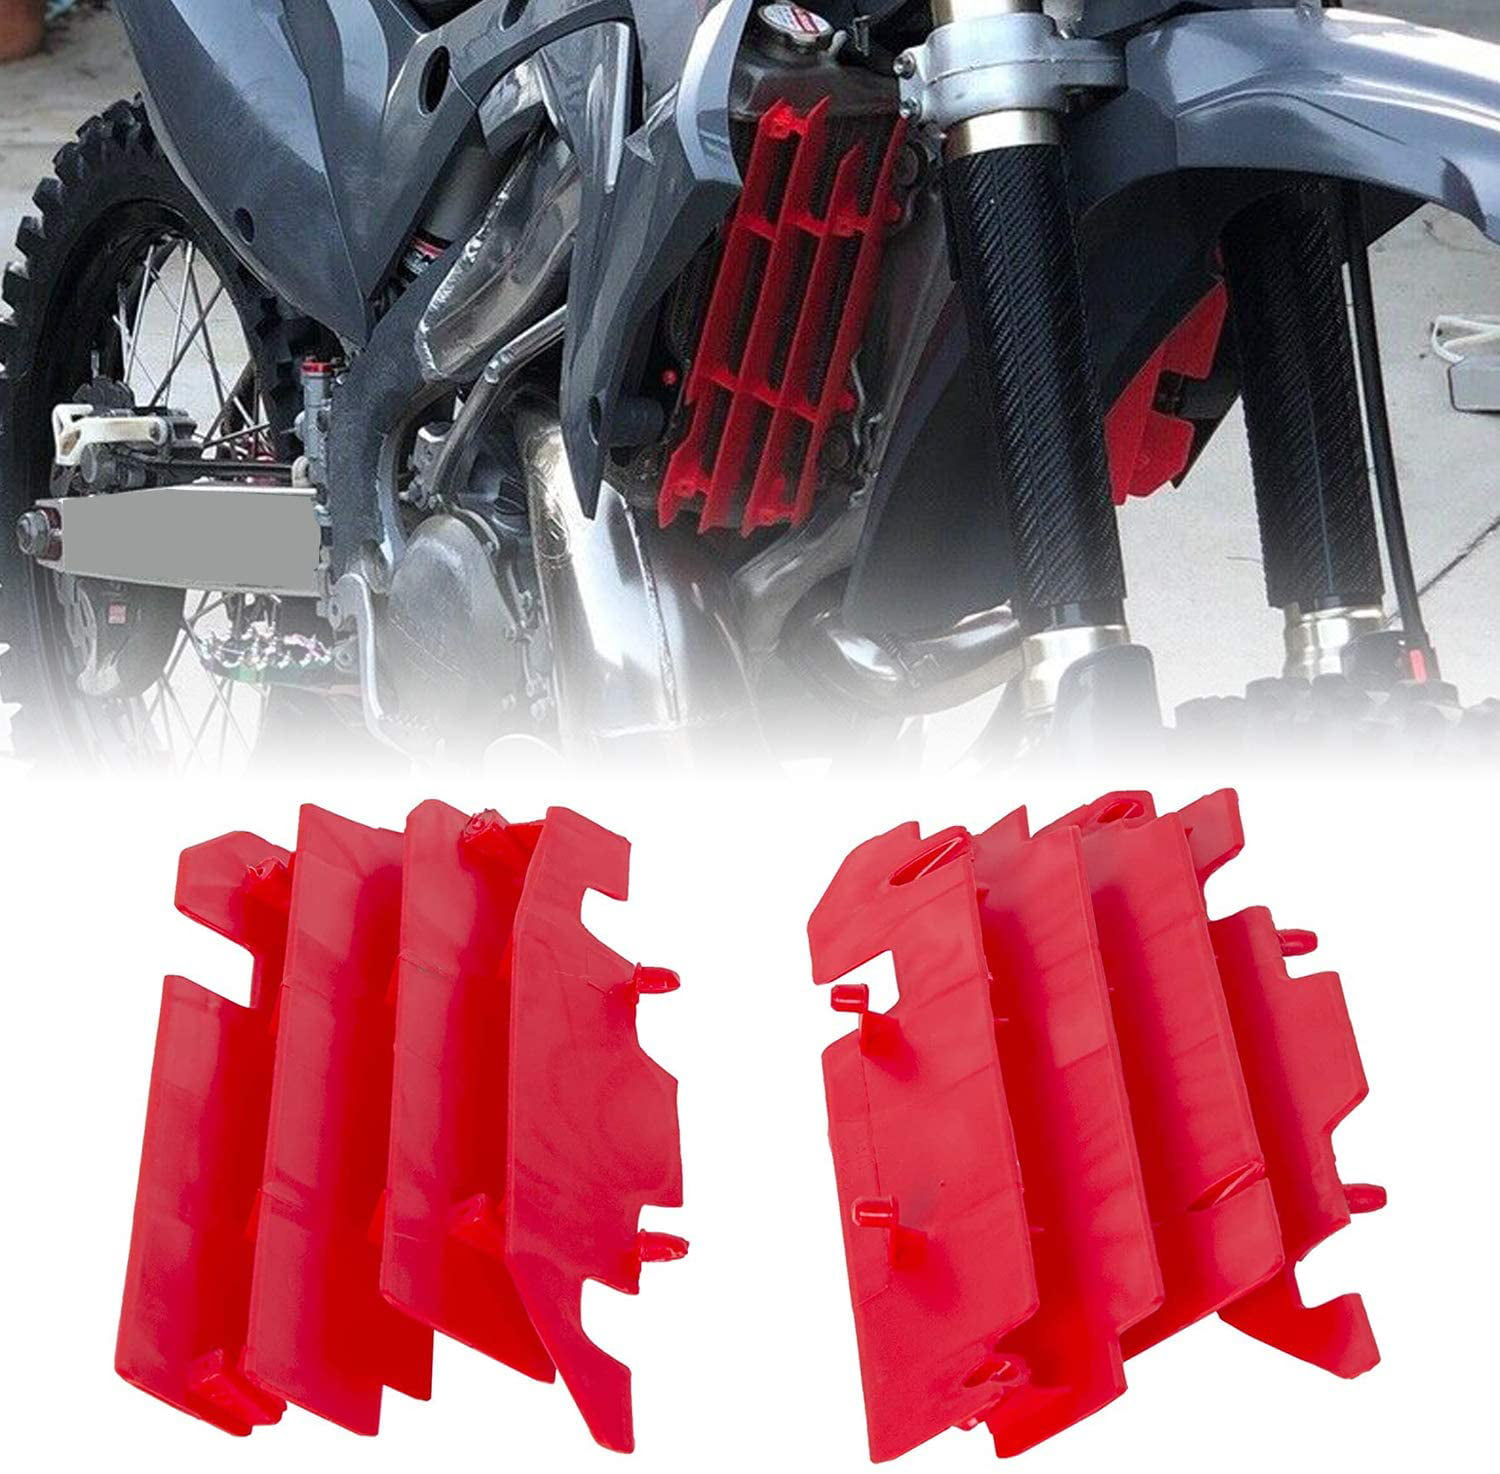 Radiator Louvers for 00-04 Honda CR125R/CR250R/CRF450R Replace for #8459900002 